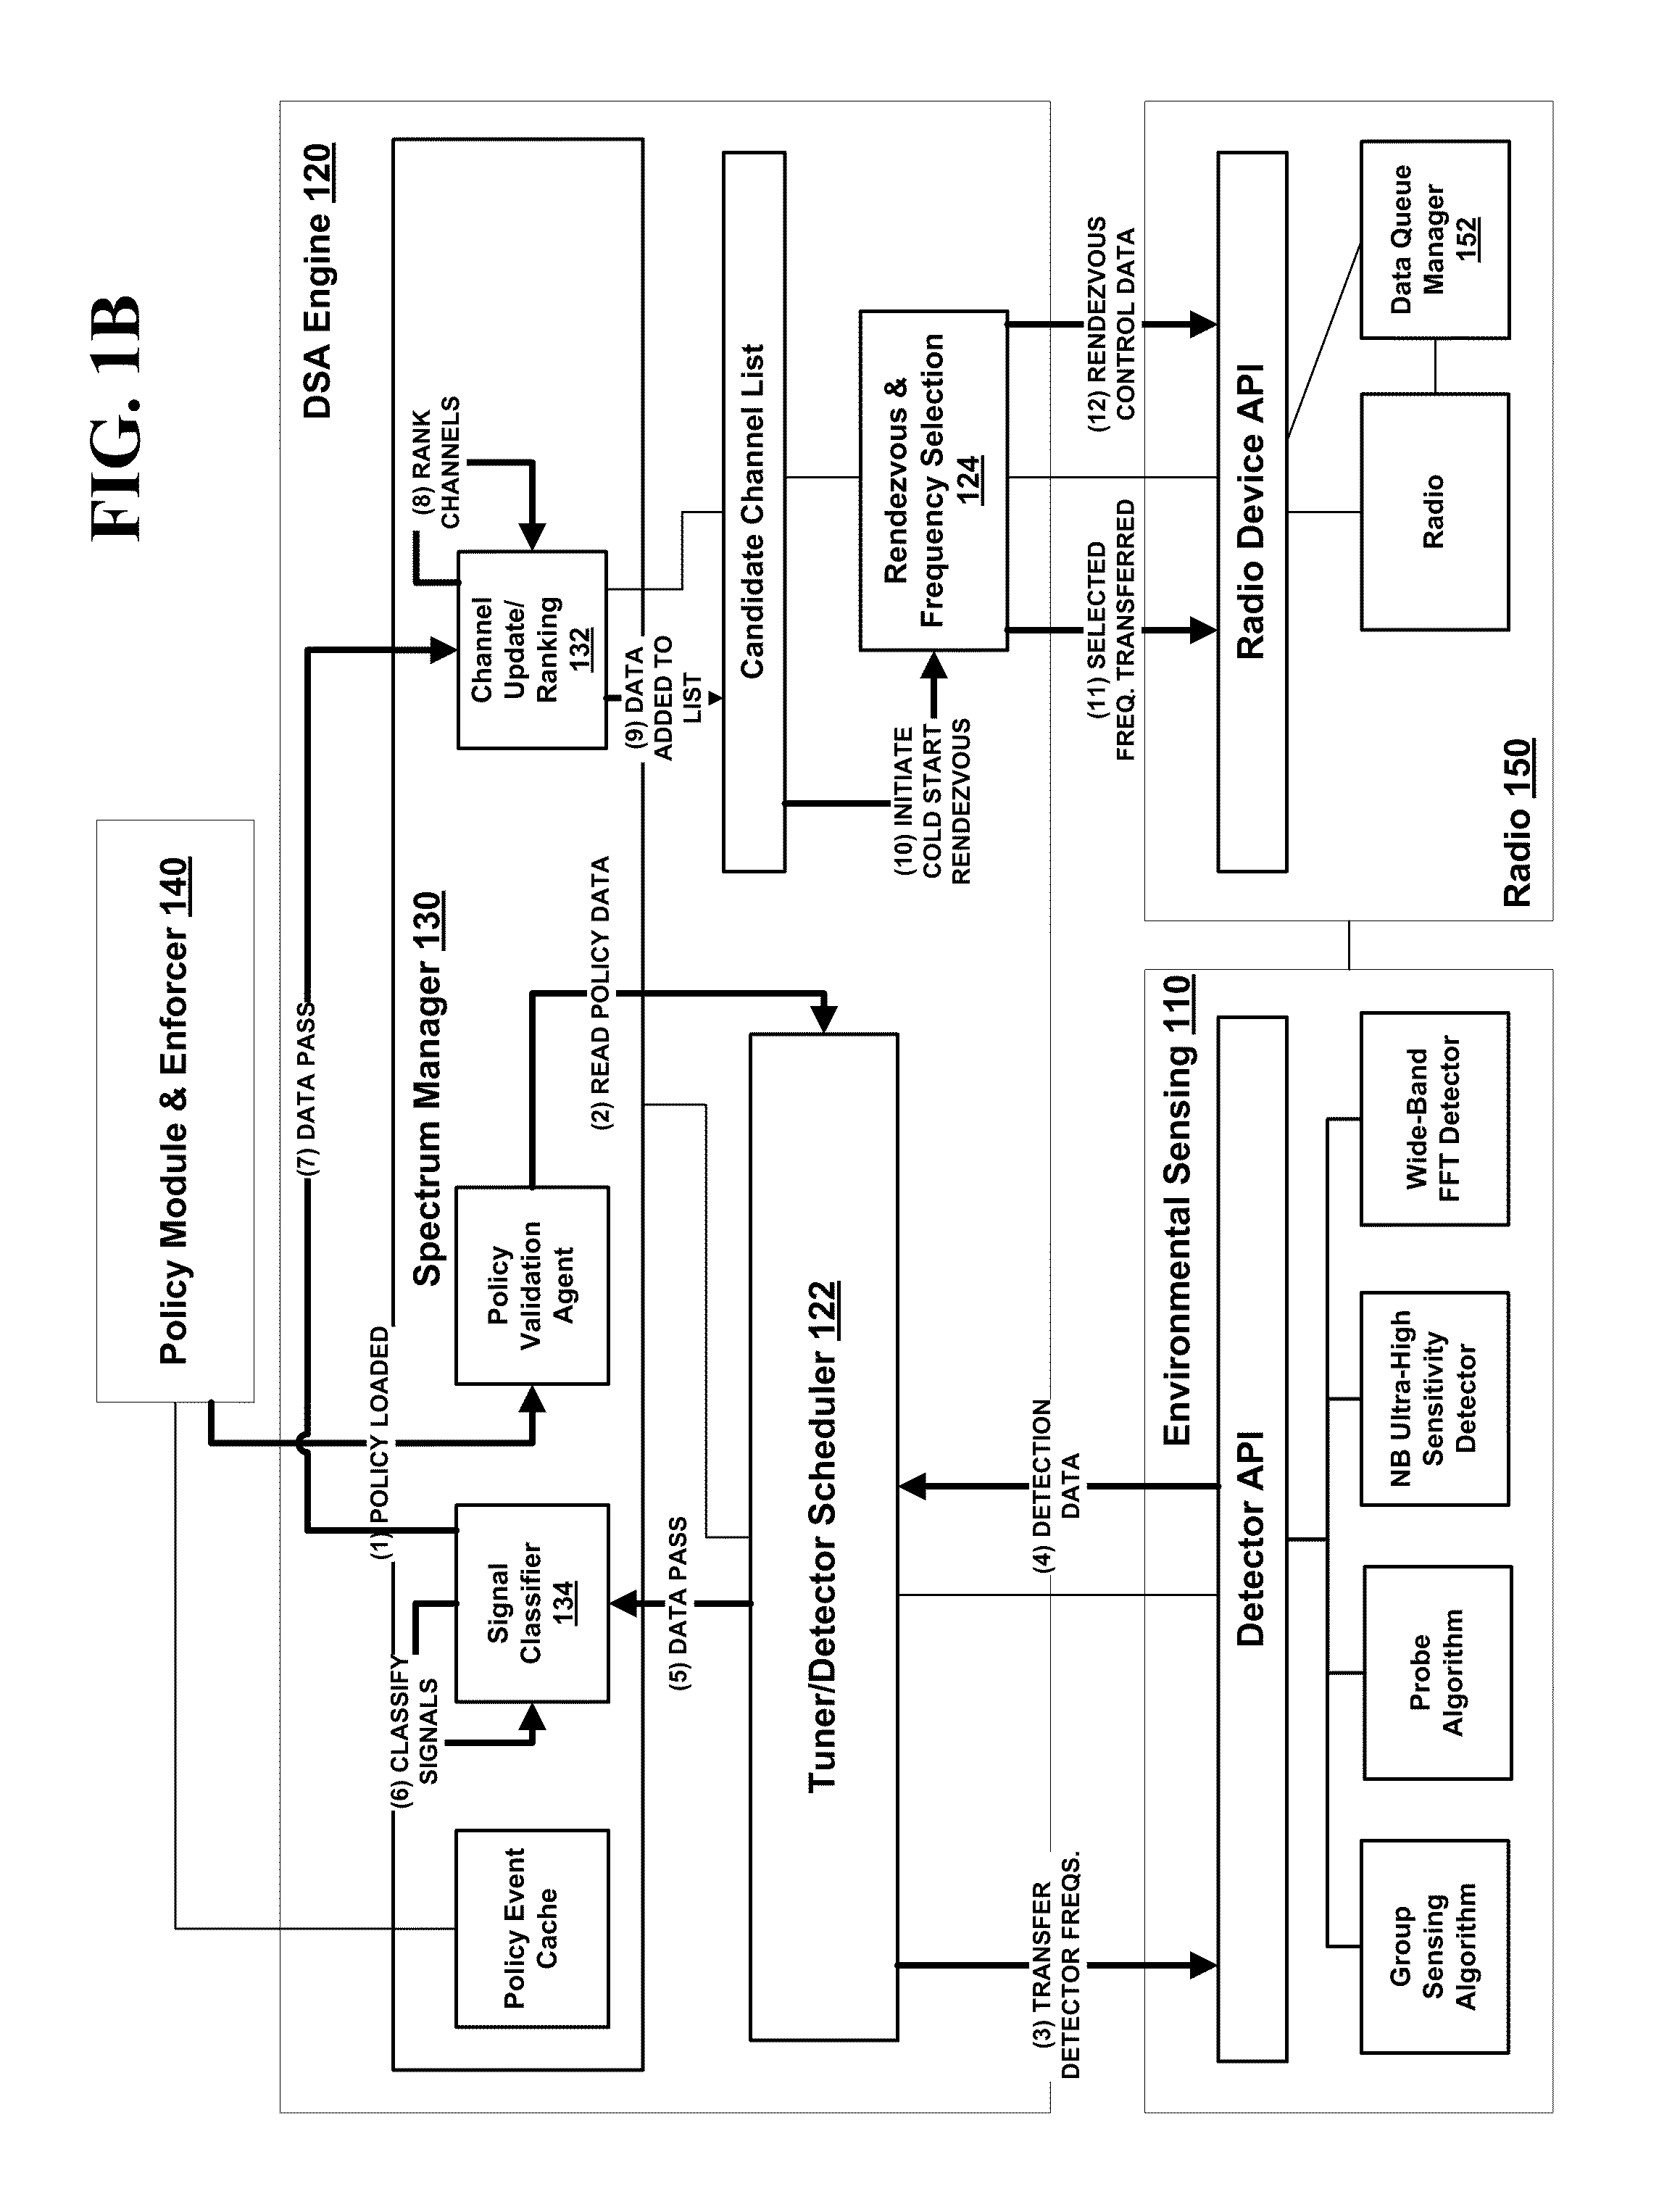 Method and system for classifying communication signals in a dynamic spectrum access system